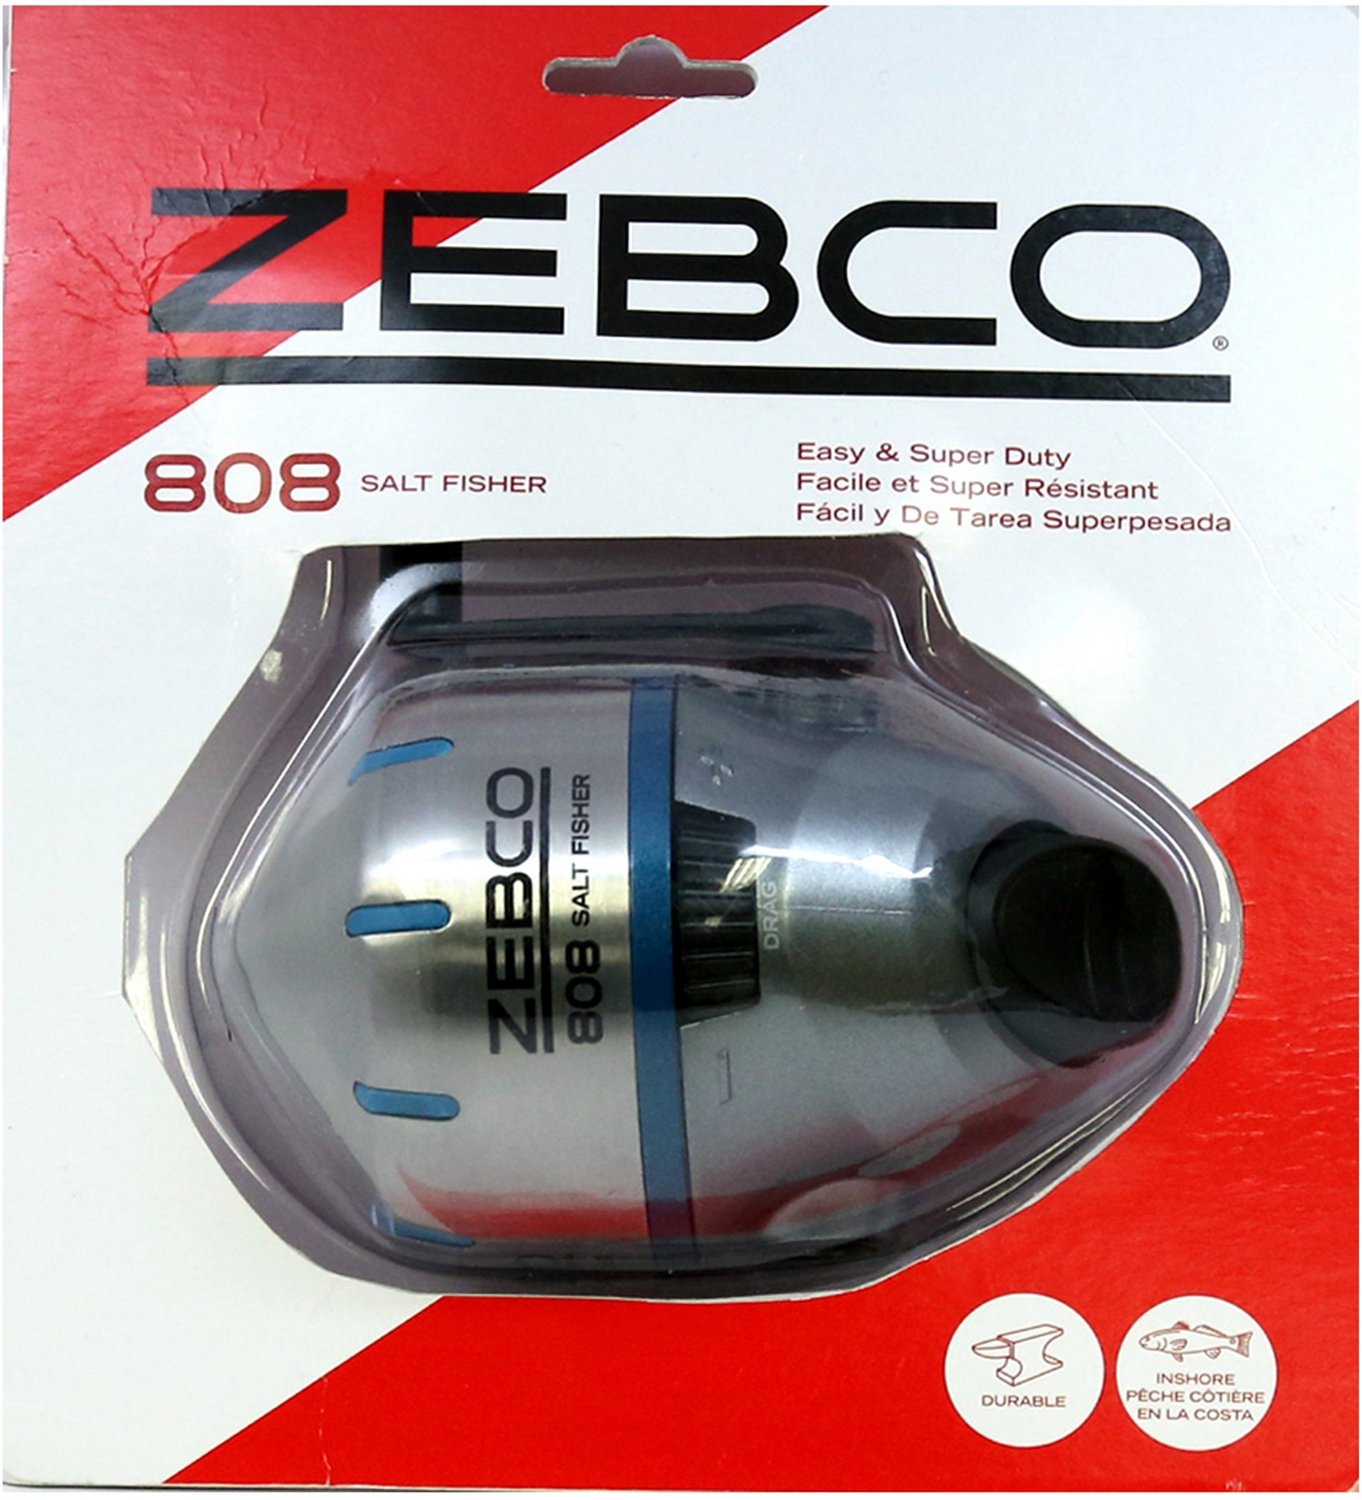 Zebco 808® Bowfisher, Safford Sporting Goods